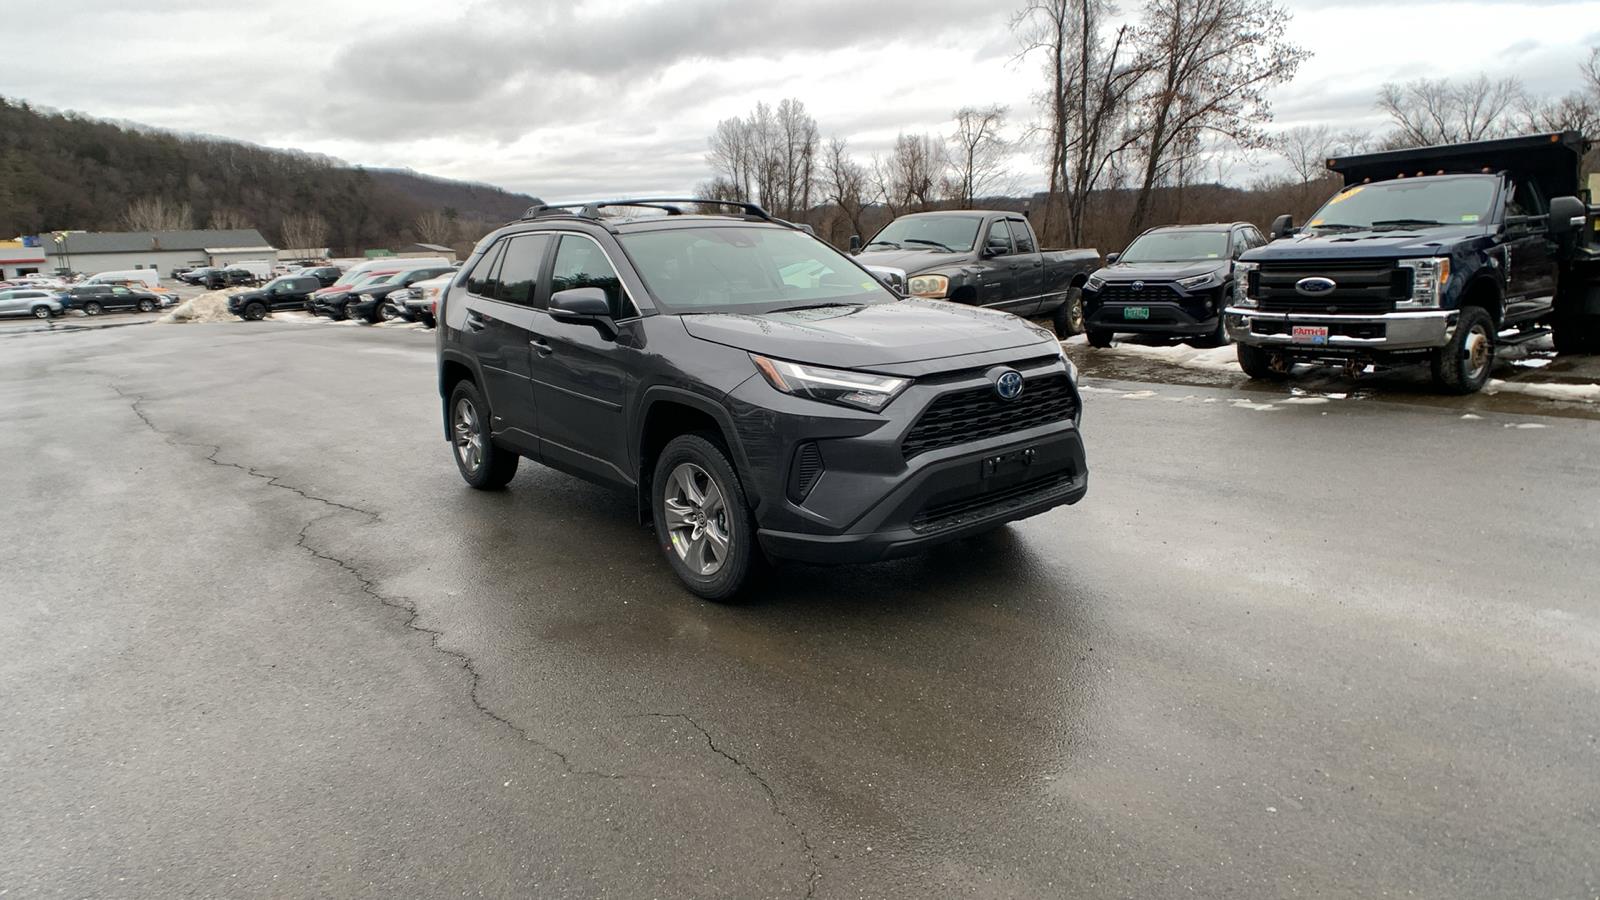 New SUV Models in Westminster, VT